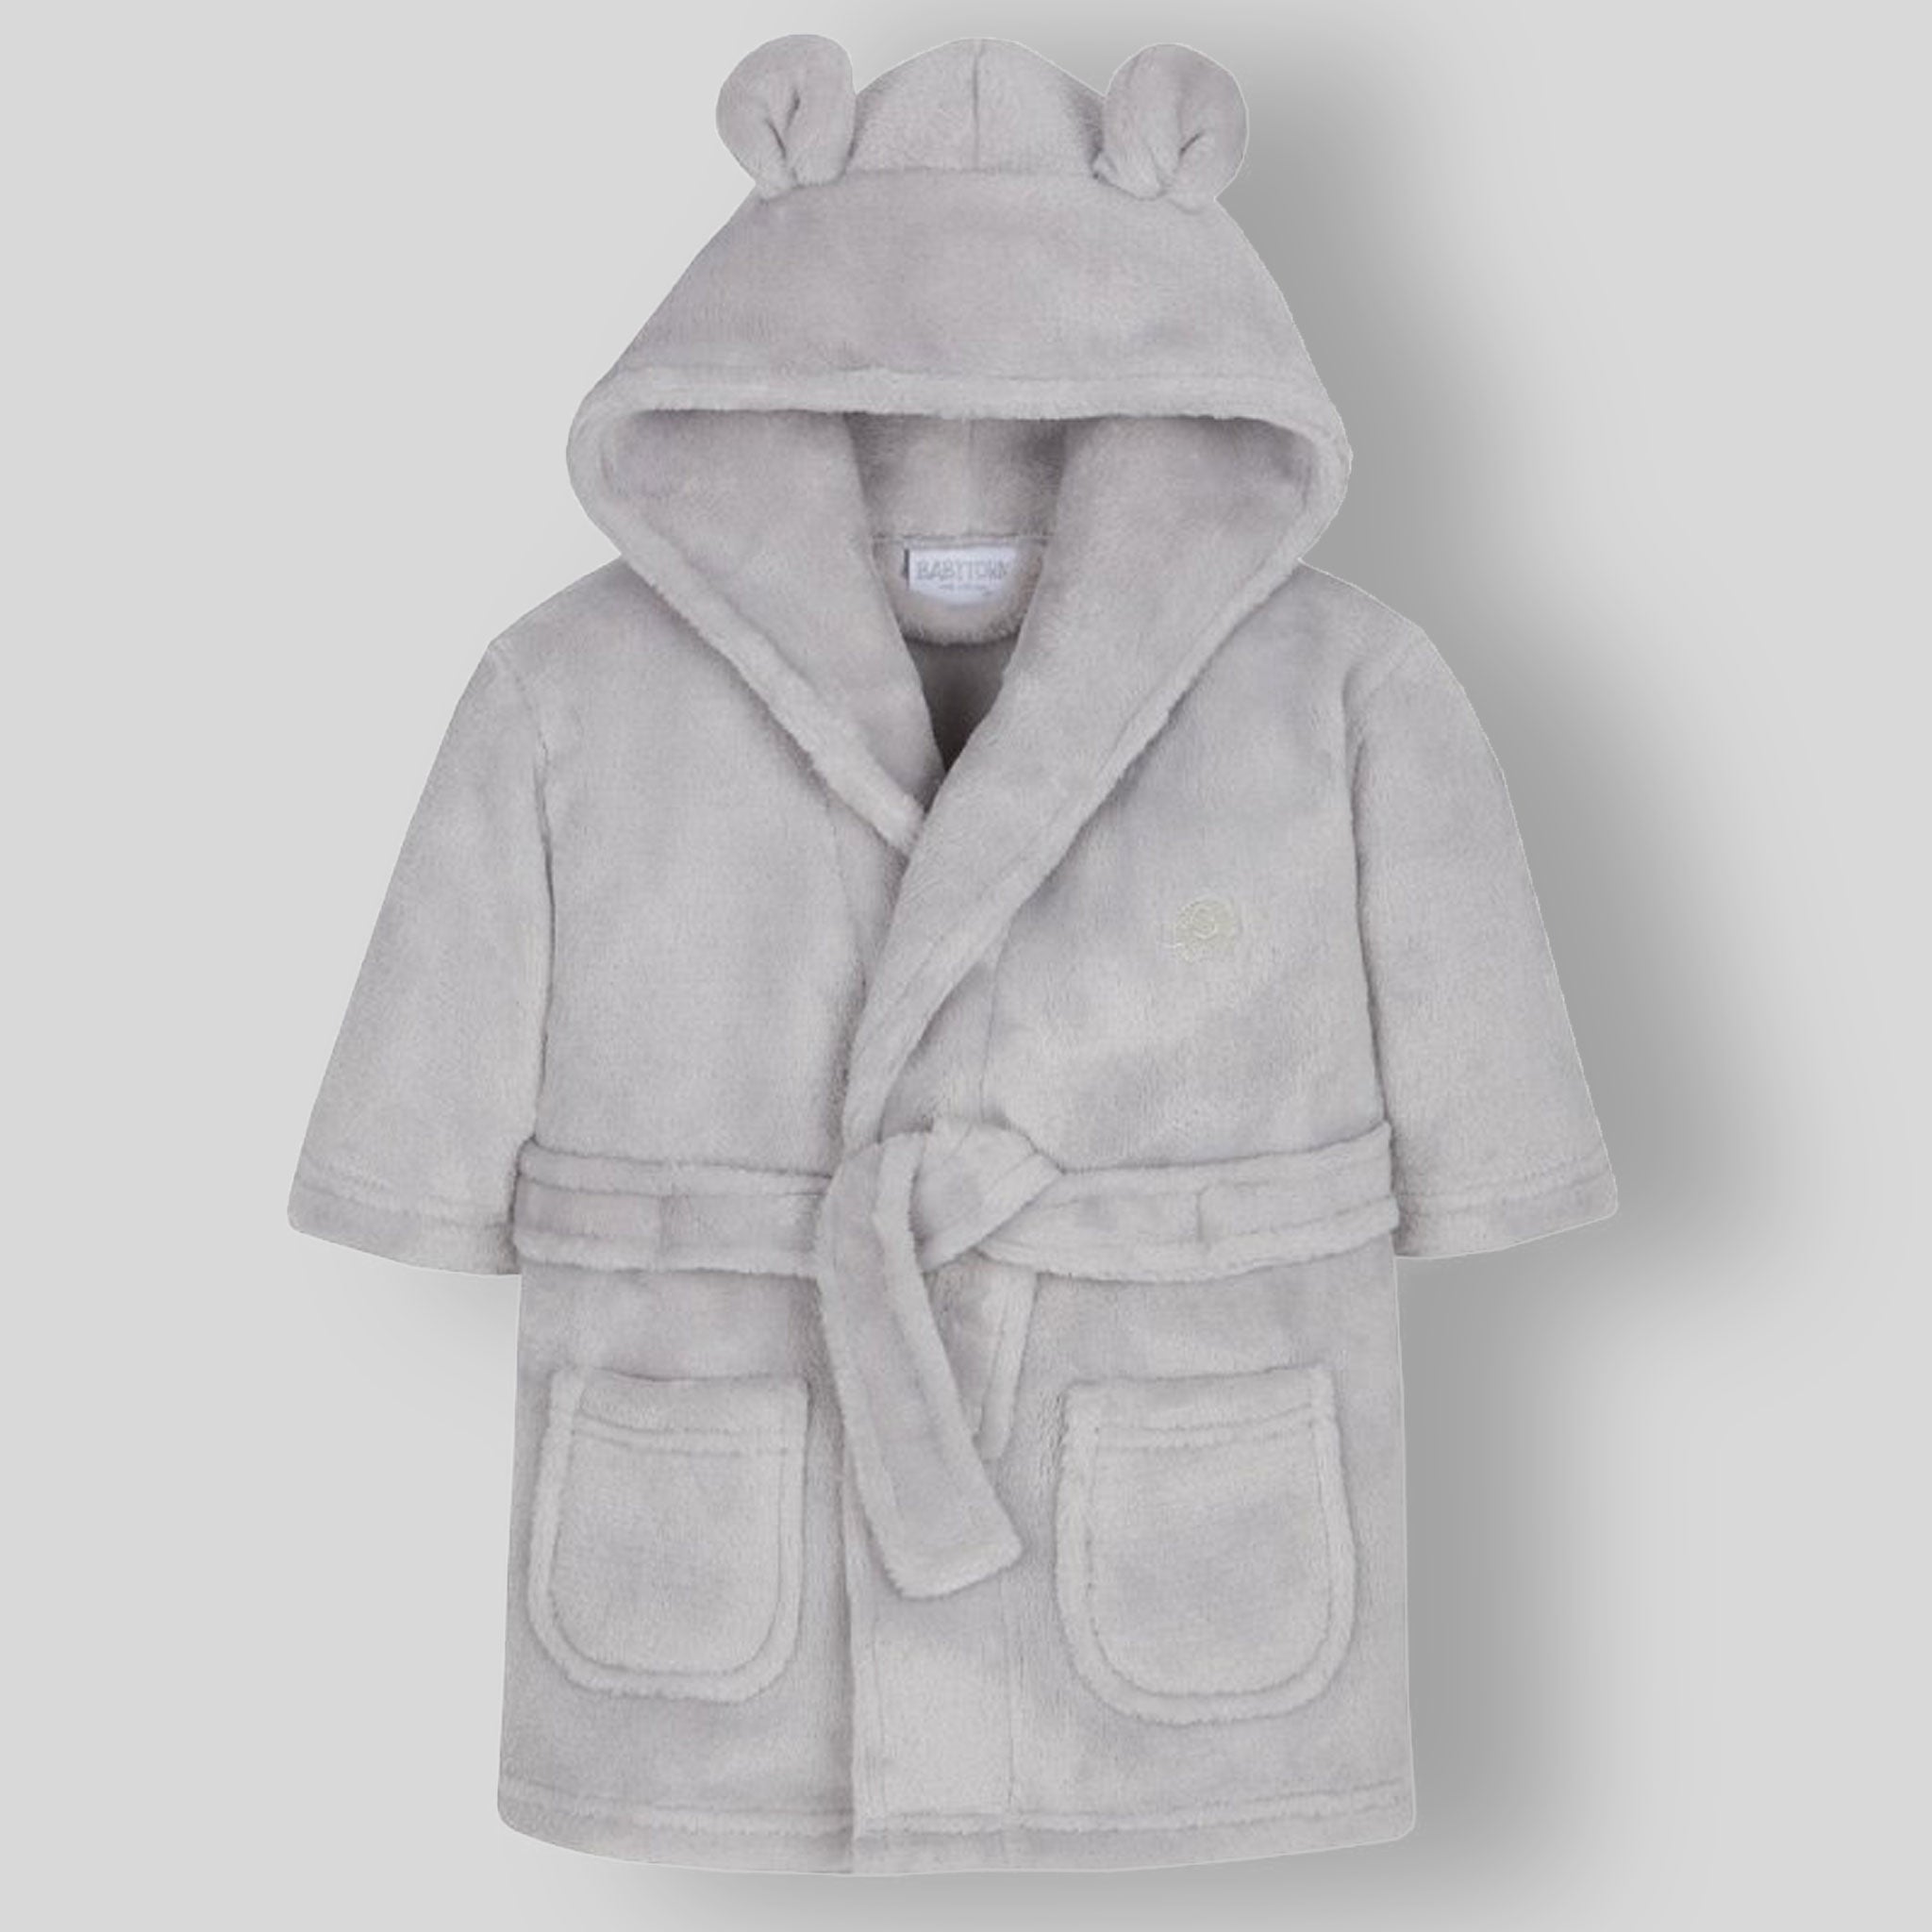 Baby Grey Dressing Gown